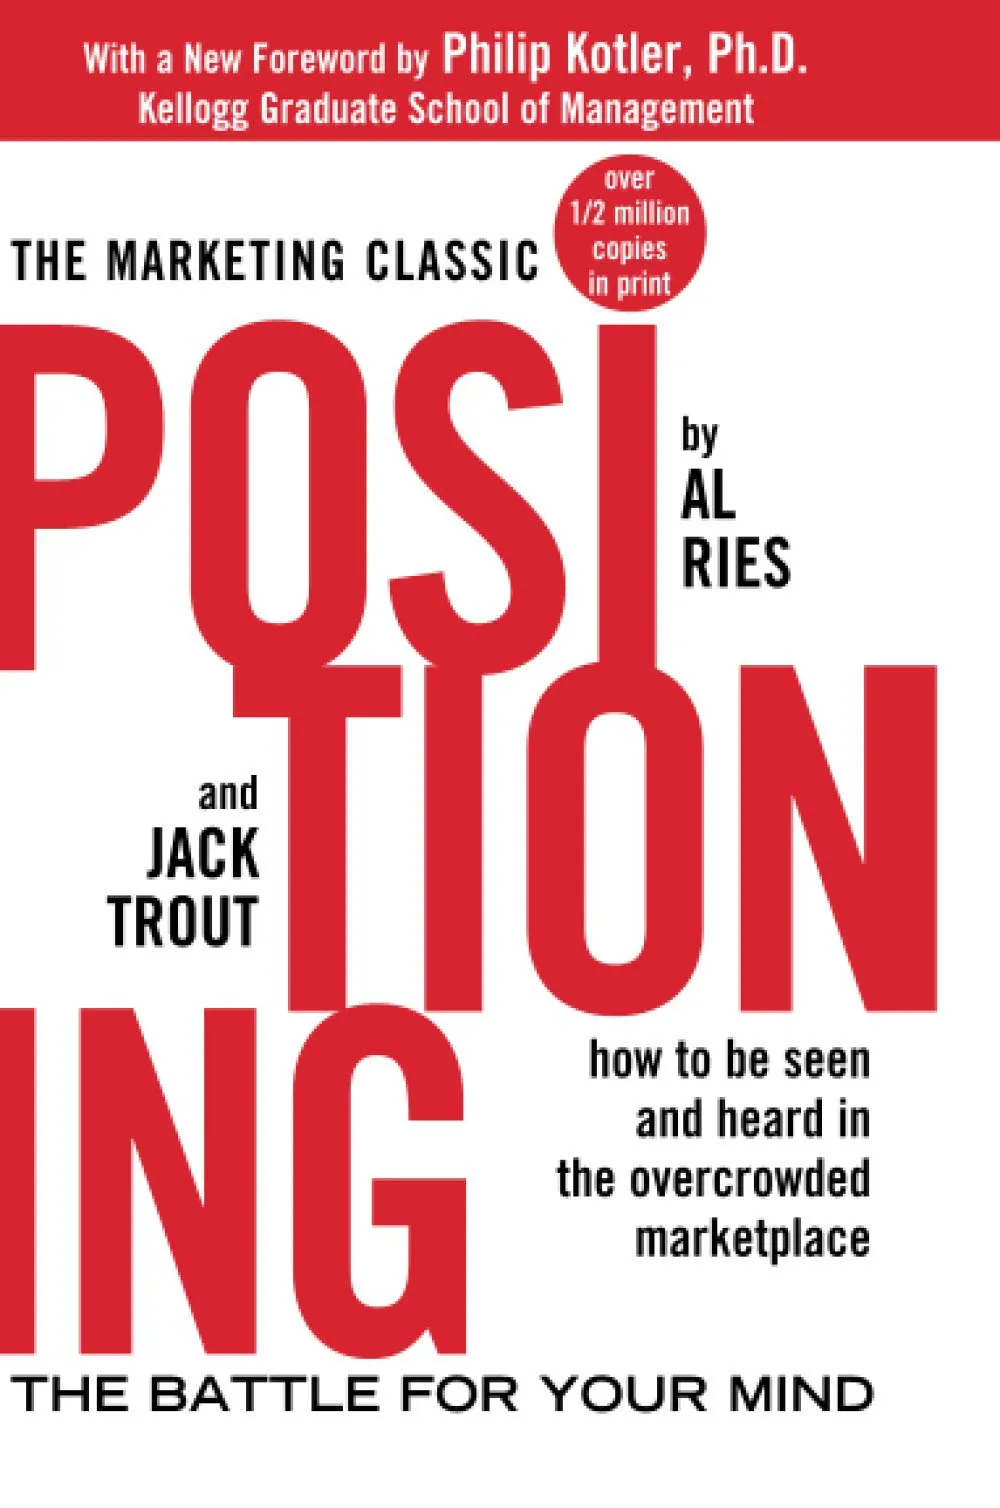 Positioning – The Battle for Your Mind